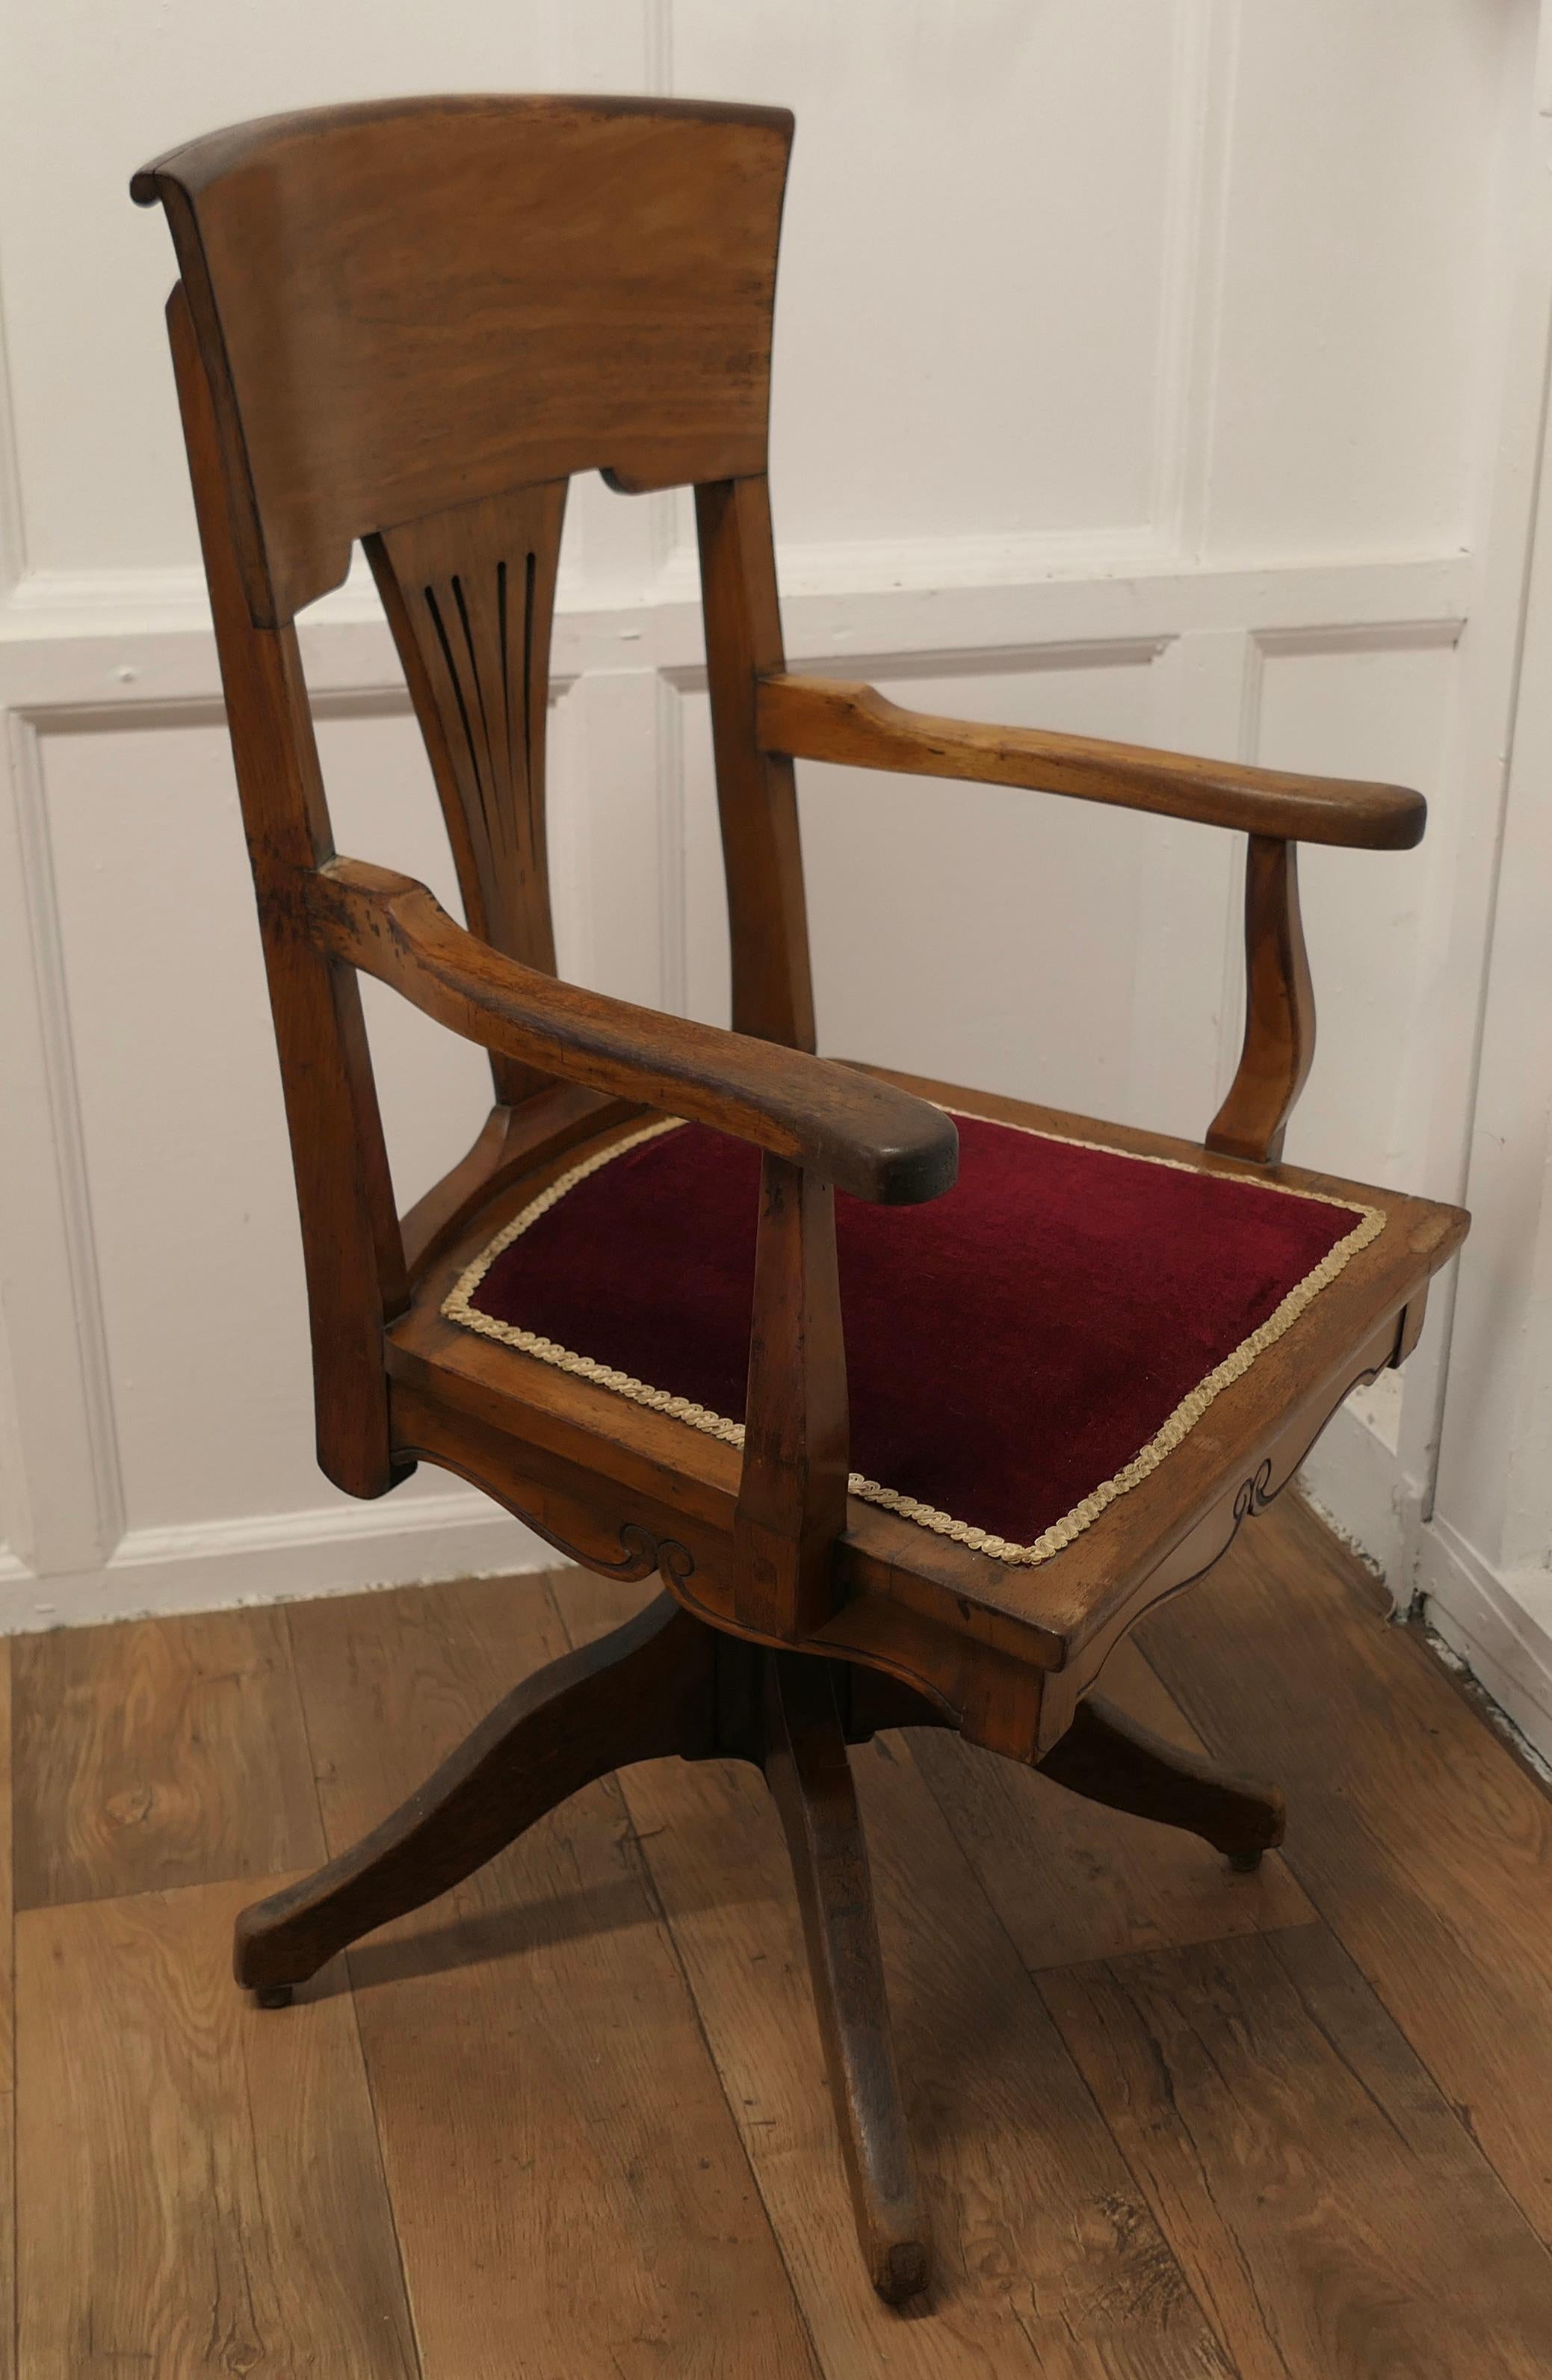 Early 20th Century Edwardian Arts and Crafts Walnut Desk or Office Chair      For Sale